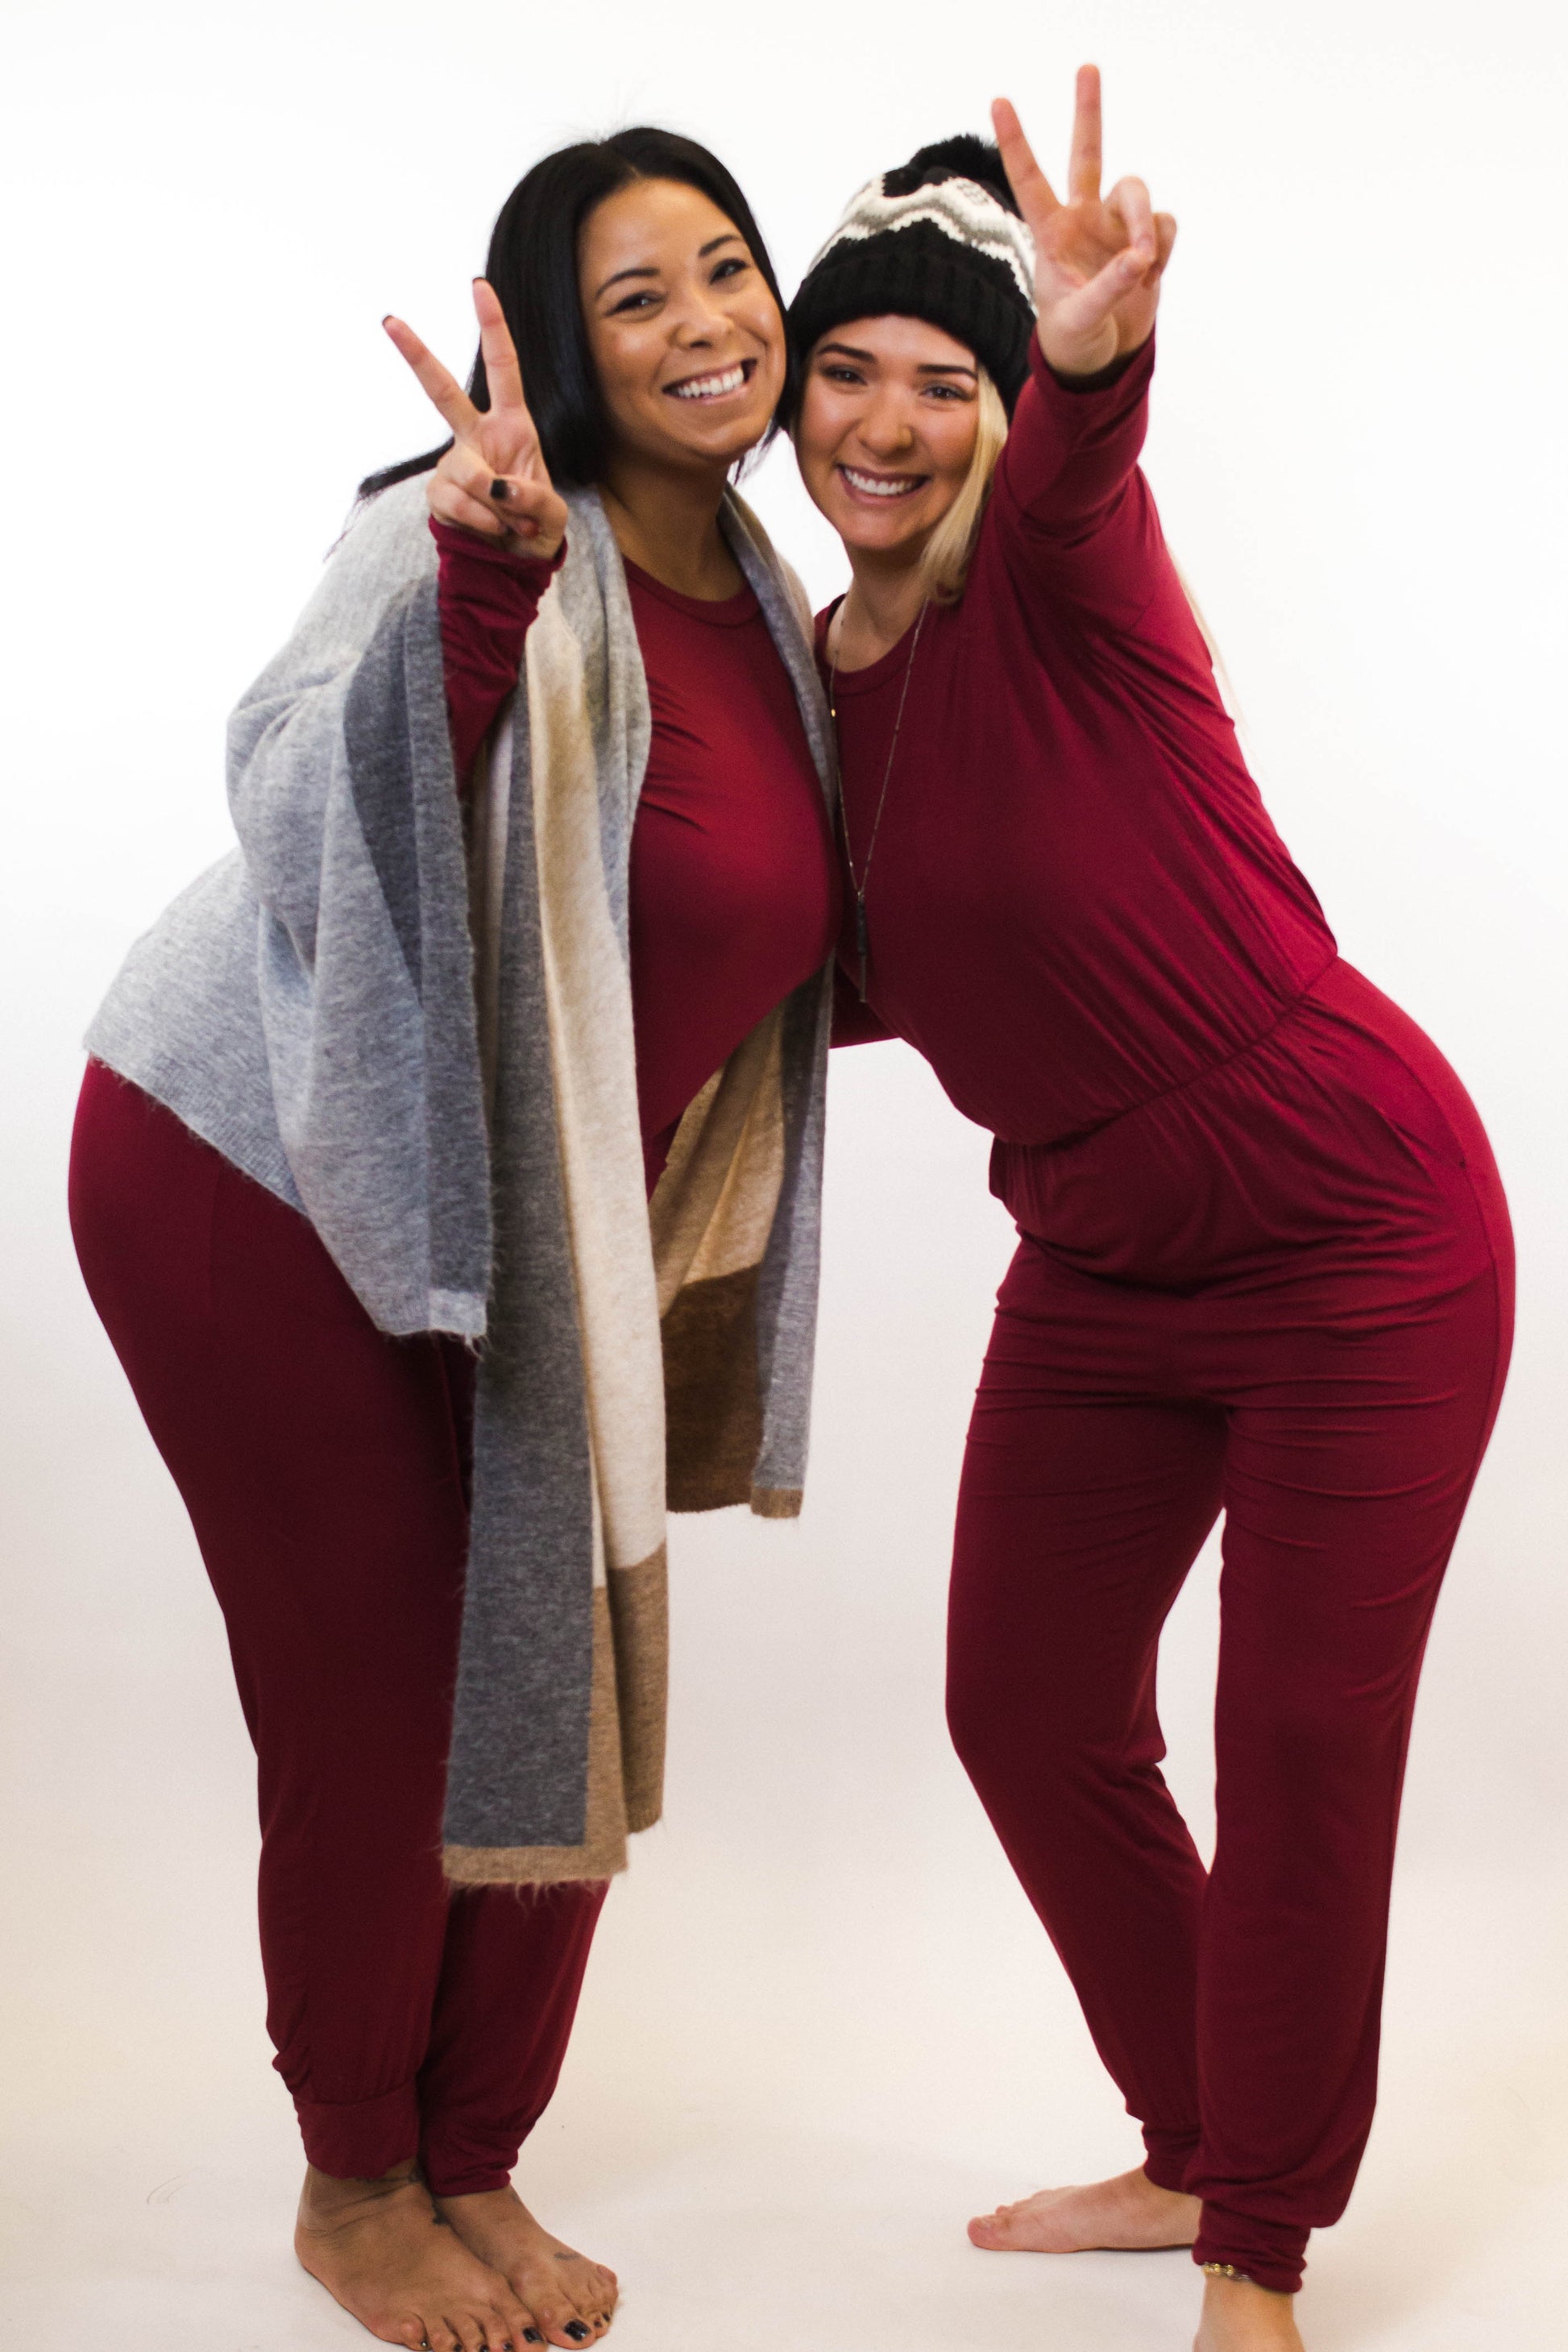 friends wearing matching red jumpsuits winter hat grey cardigan peace signs smiling